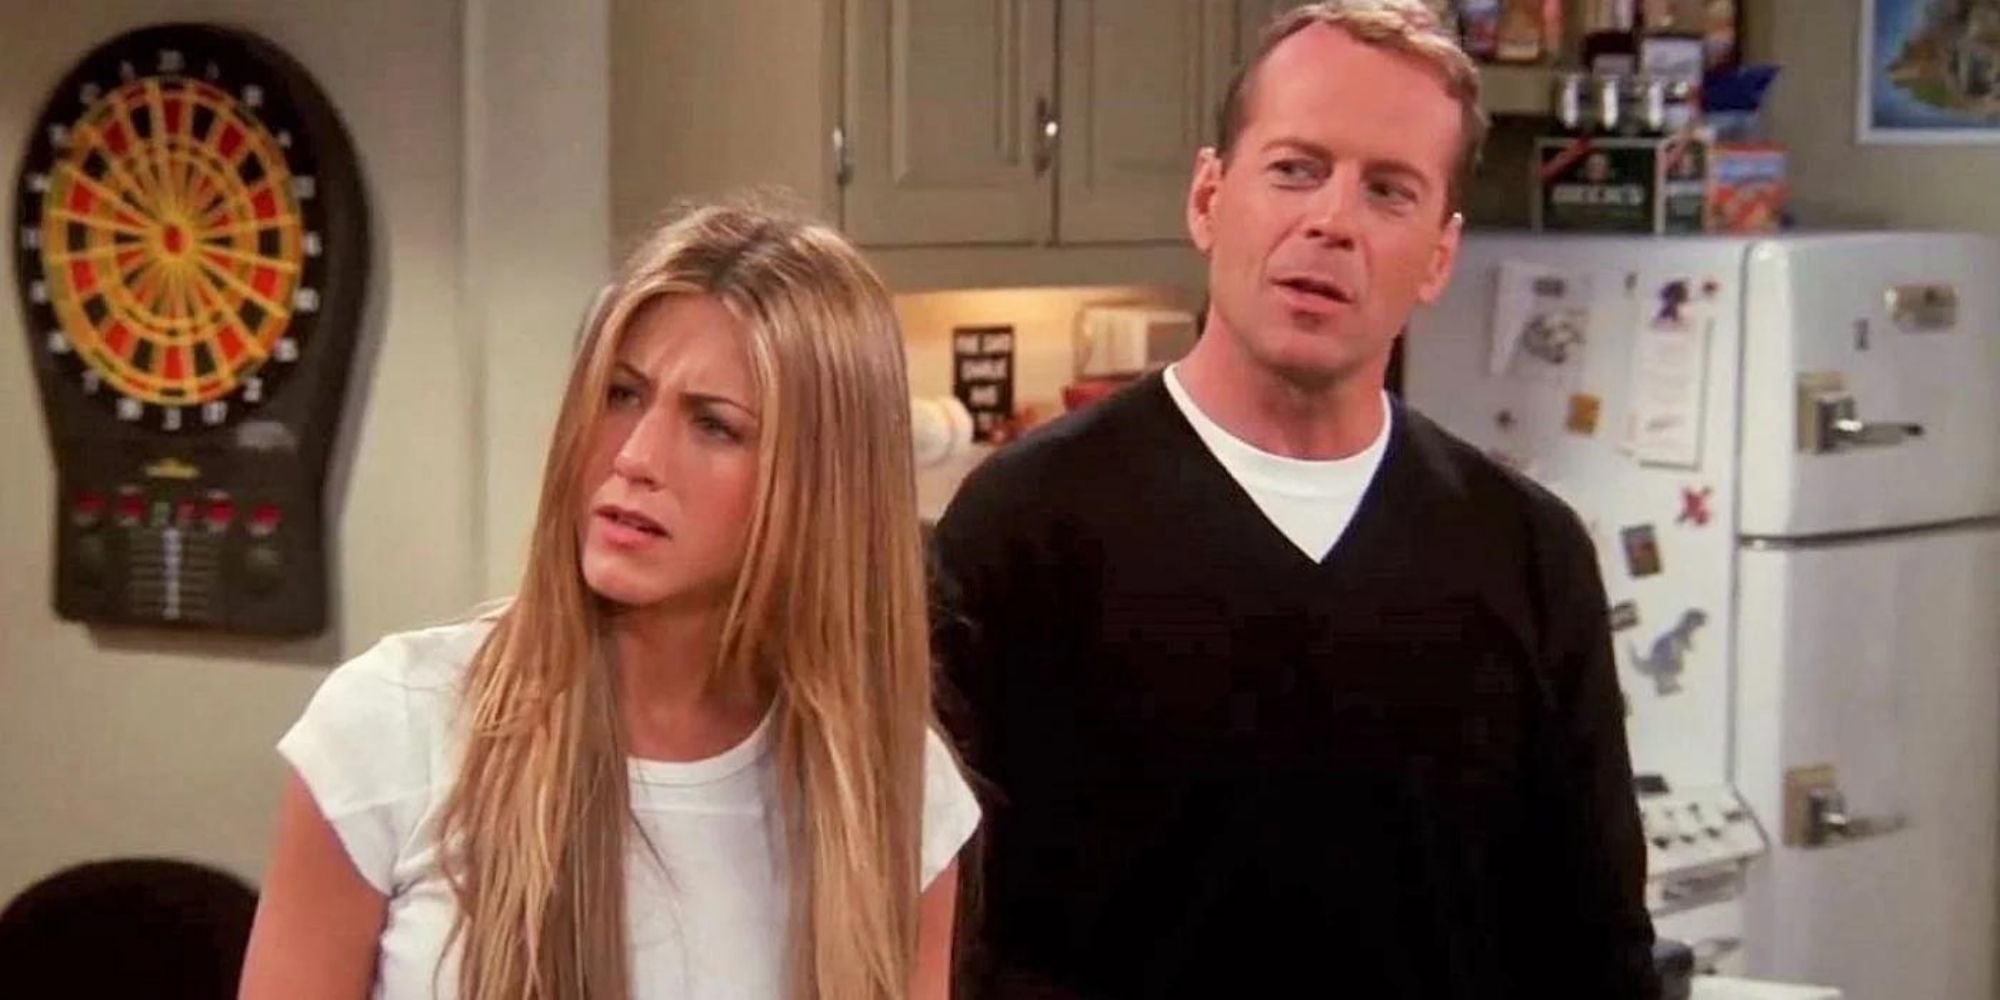 Jennifer Aniston and Bruce Willis in Friends